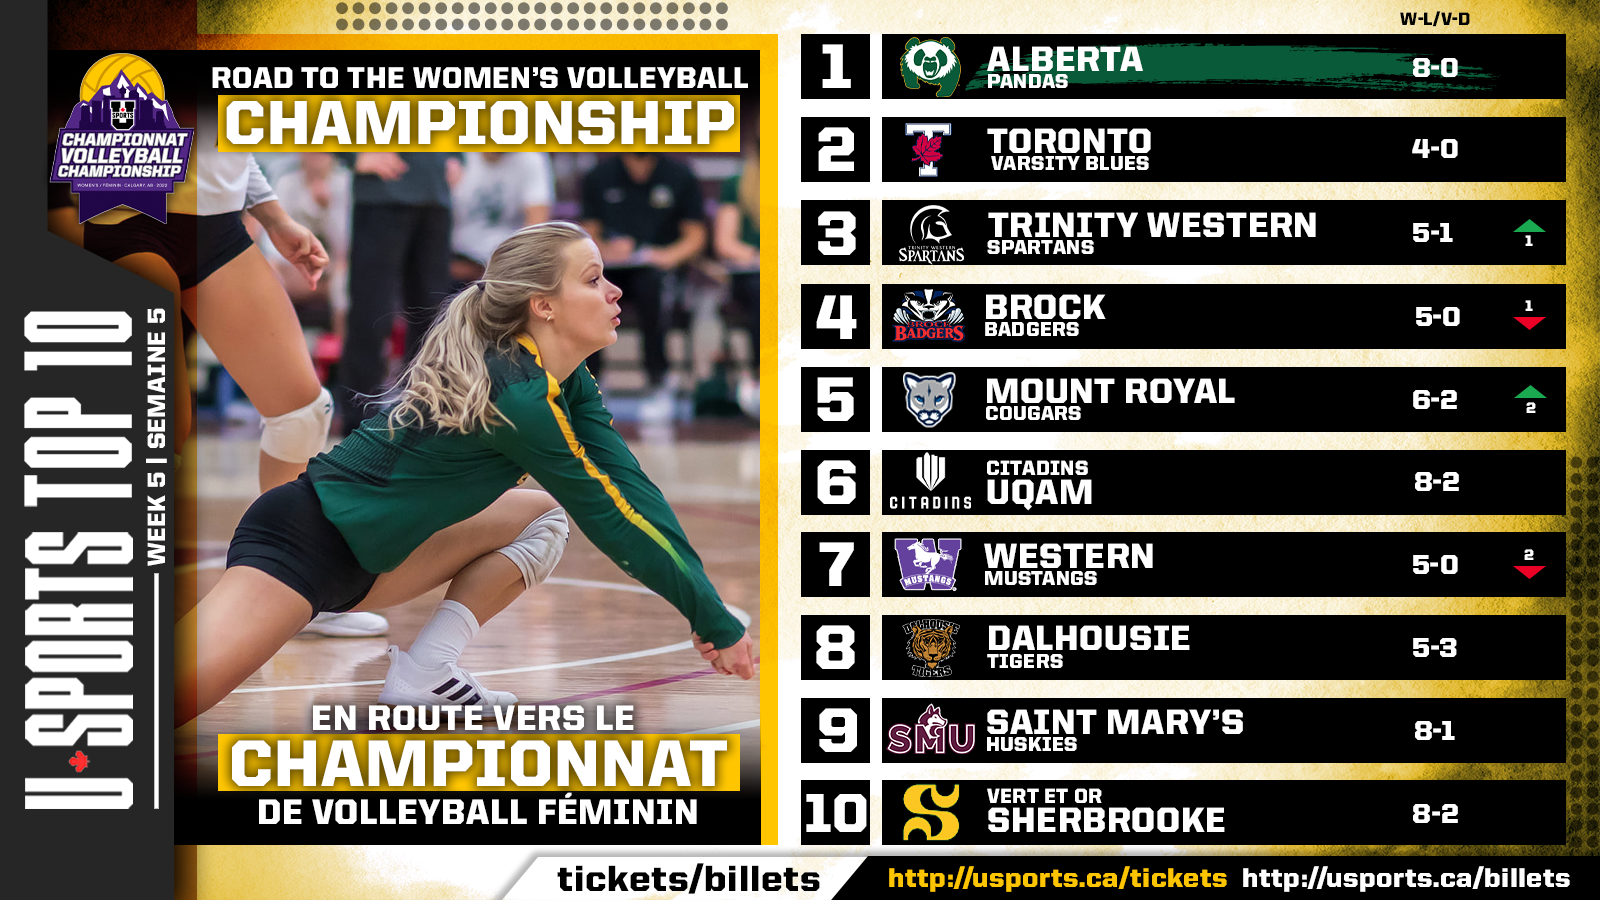 TOP_10_WVBALL_WK5.png (1.14 MB)